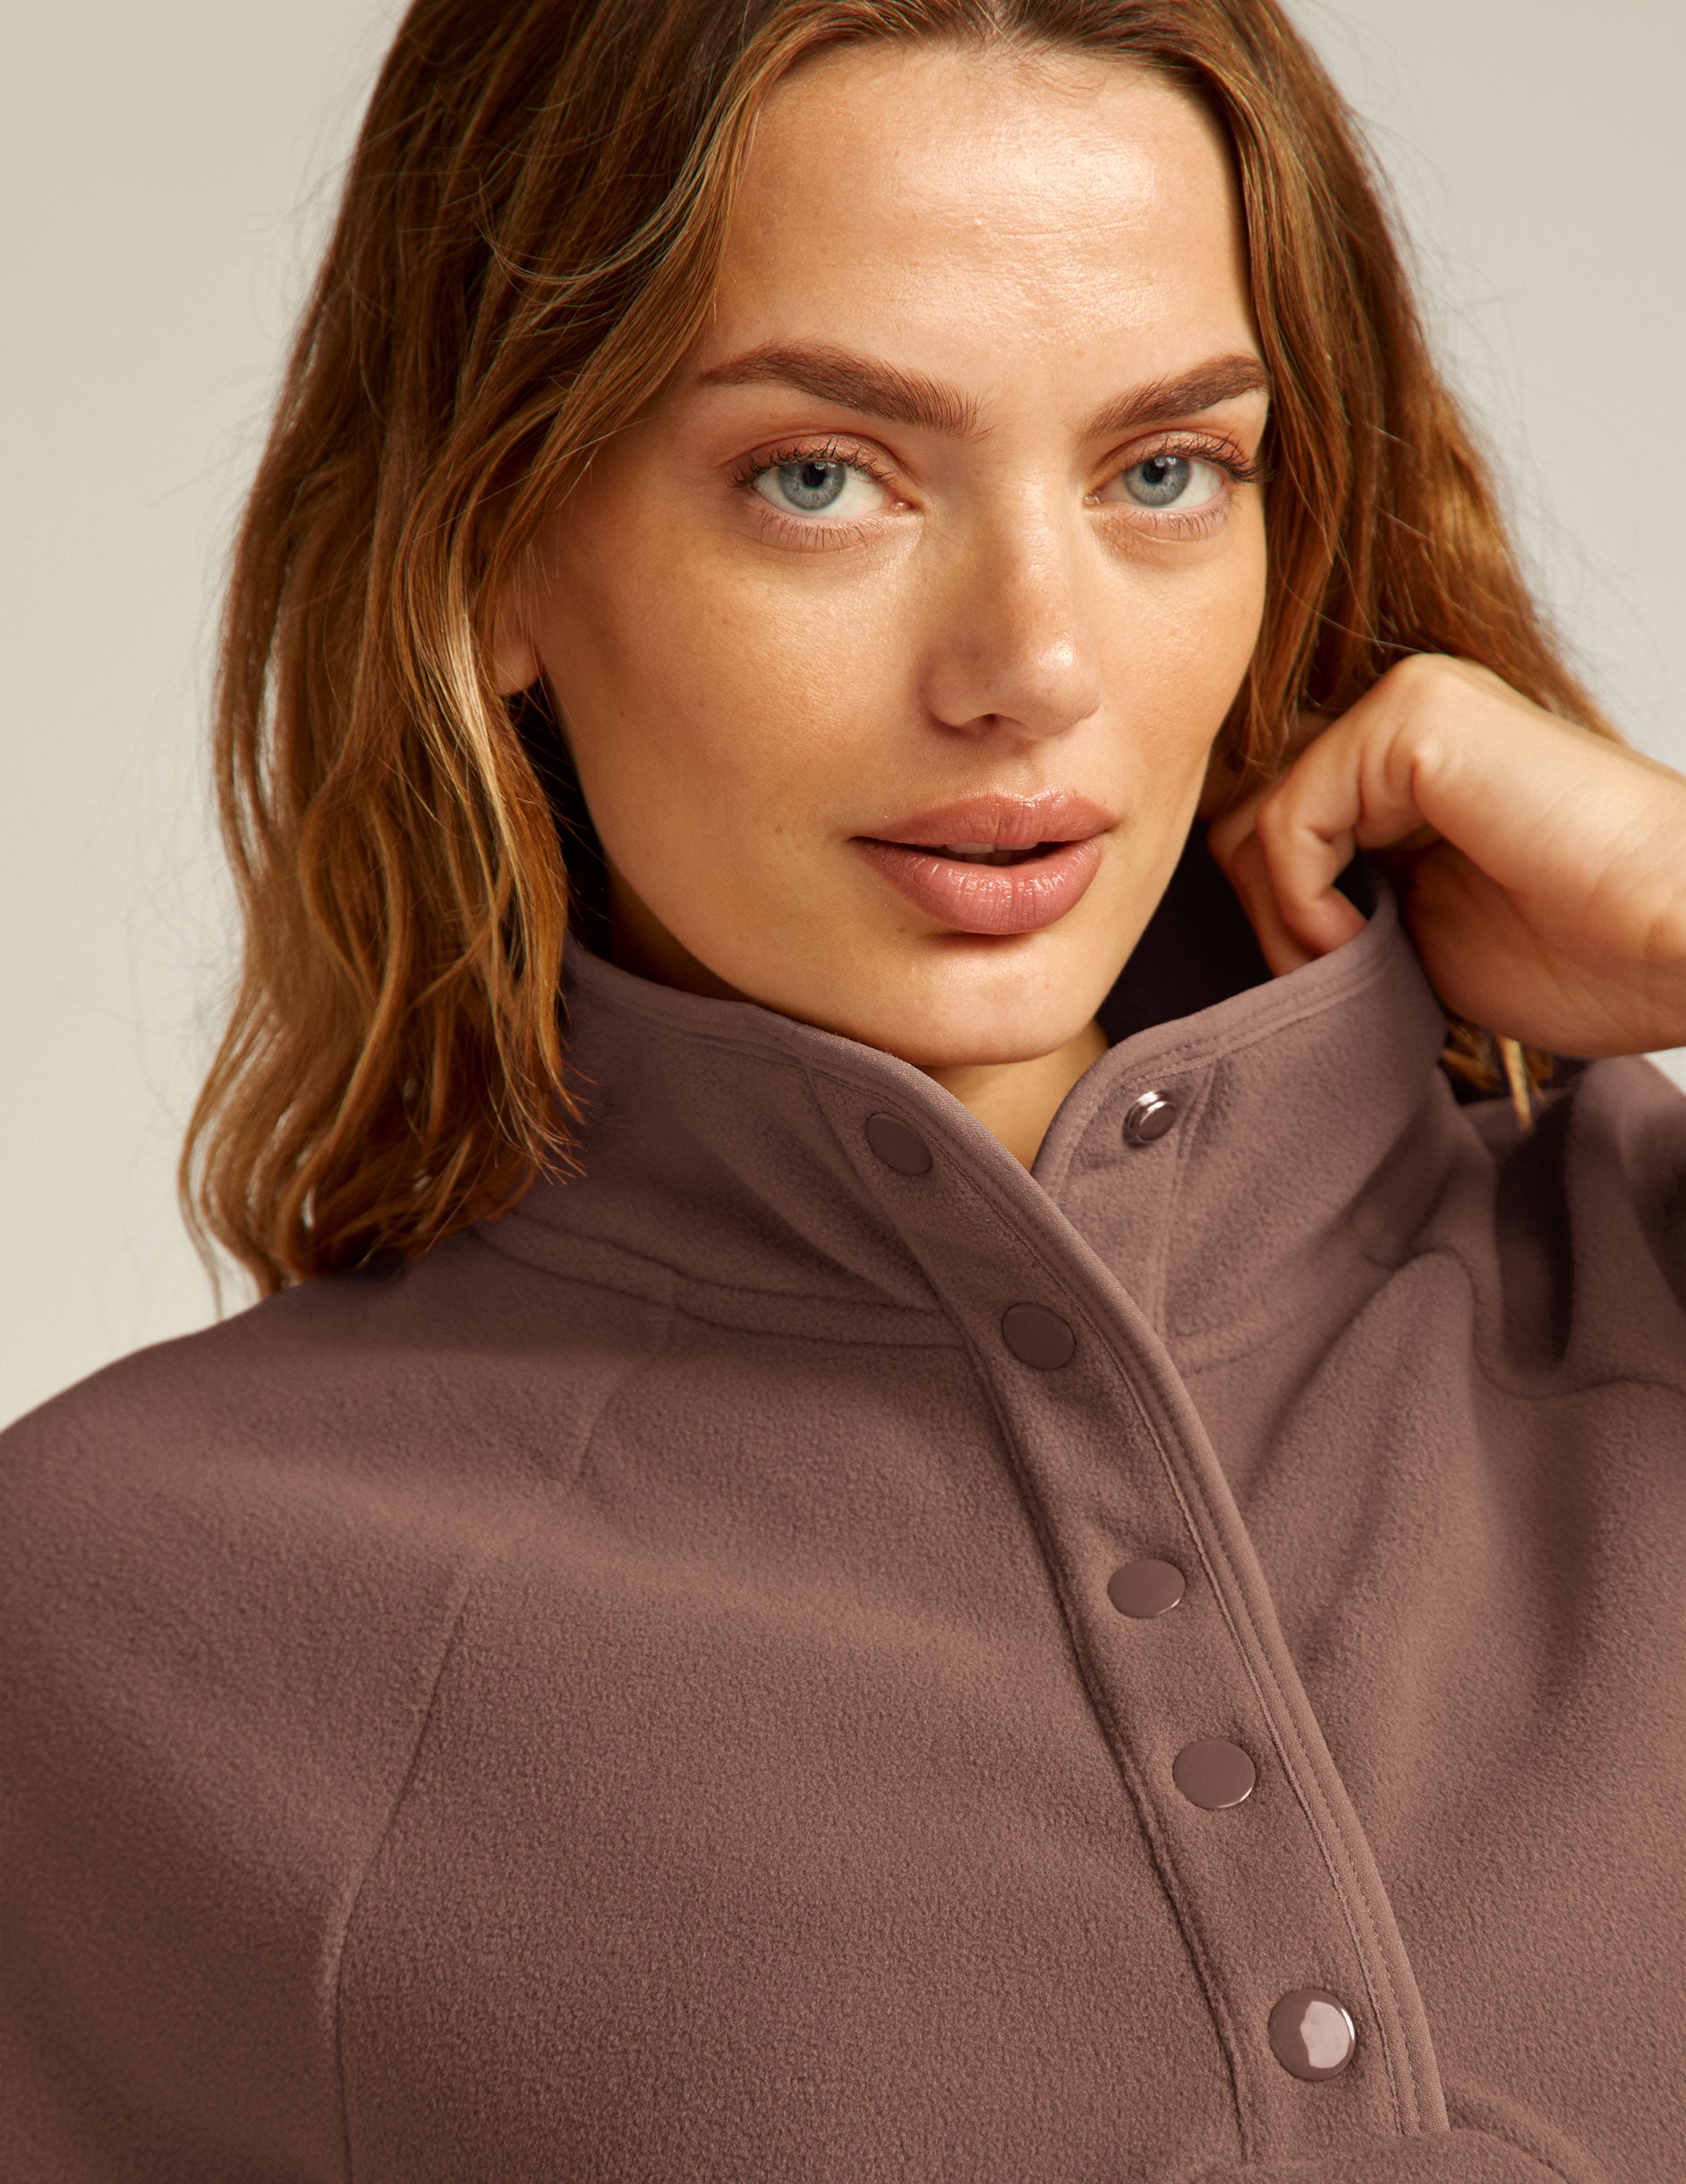 brown pullover with quarter buttons. 